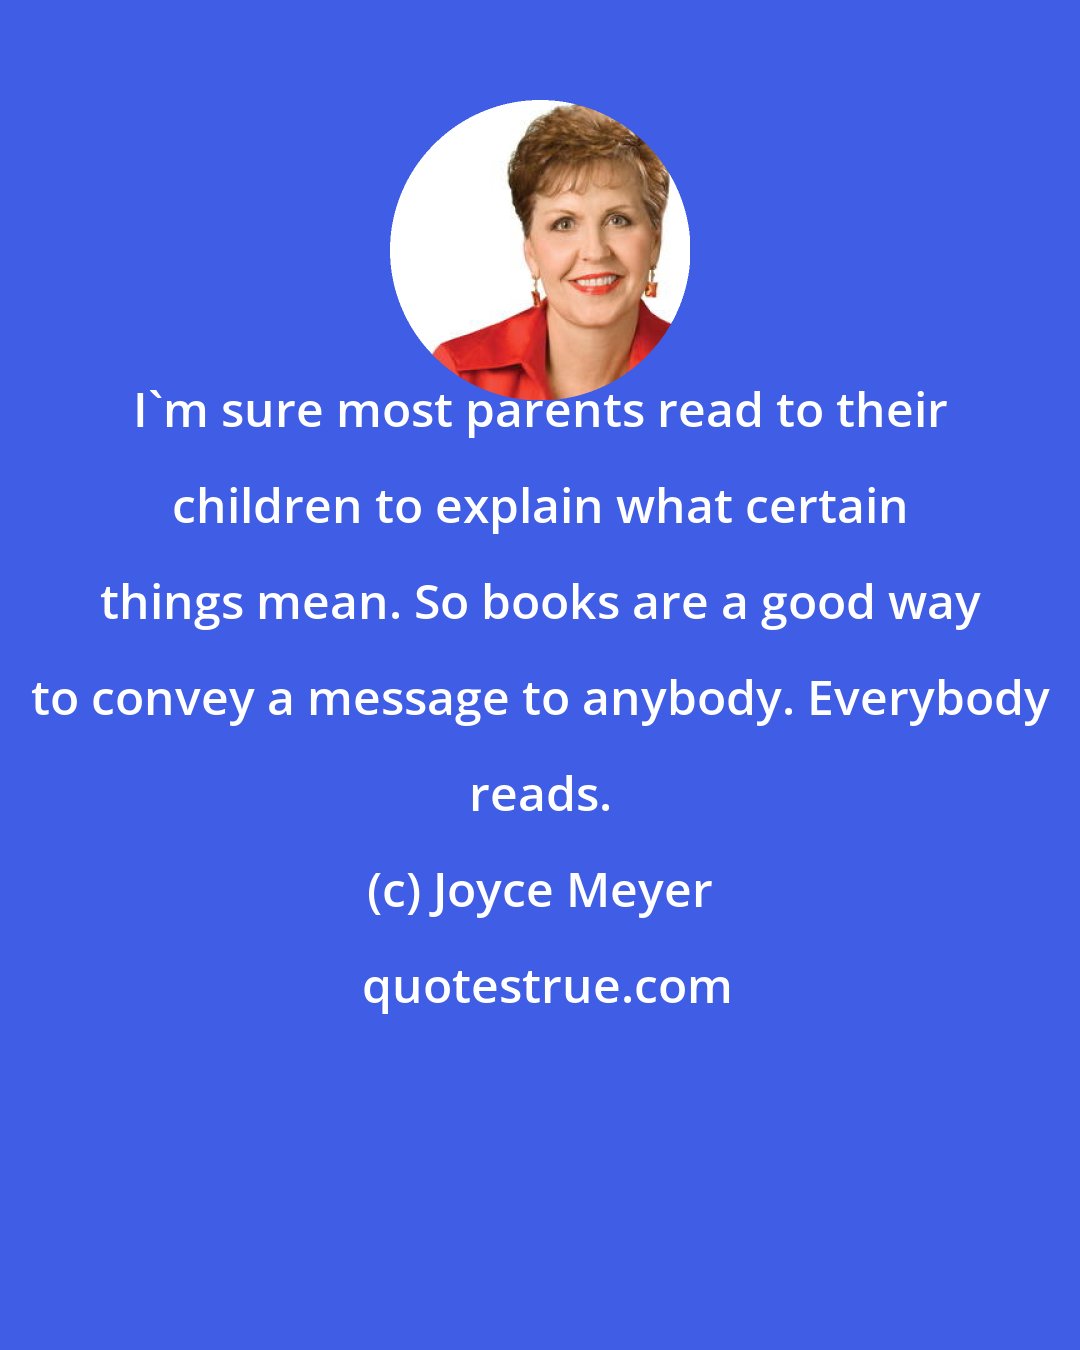 Joyce Meyer: I'm sure most parents read to their children to explain what certain things mean. So books are a good way to convey a message to anybody. Everybody reads.